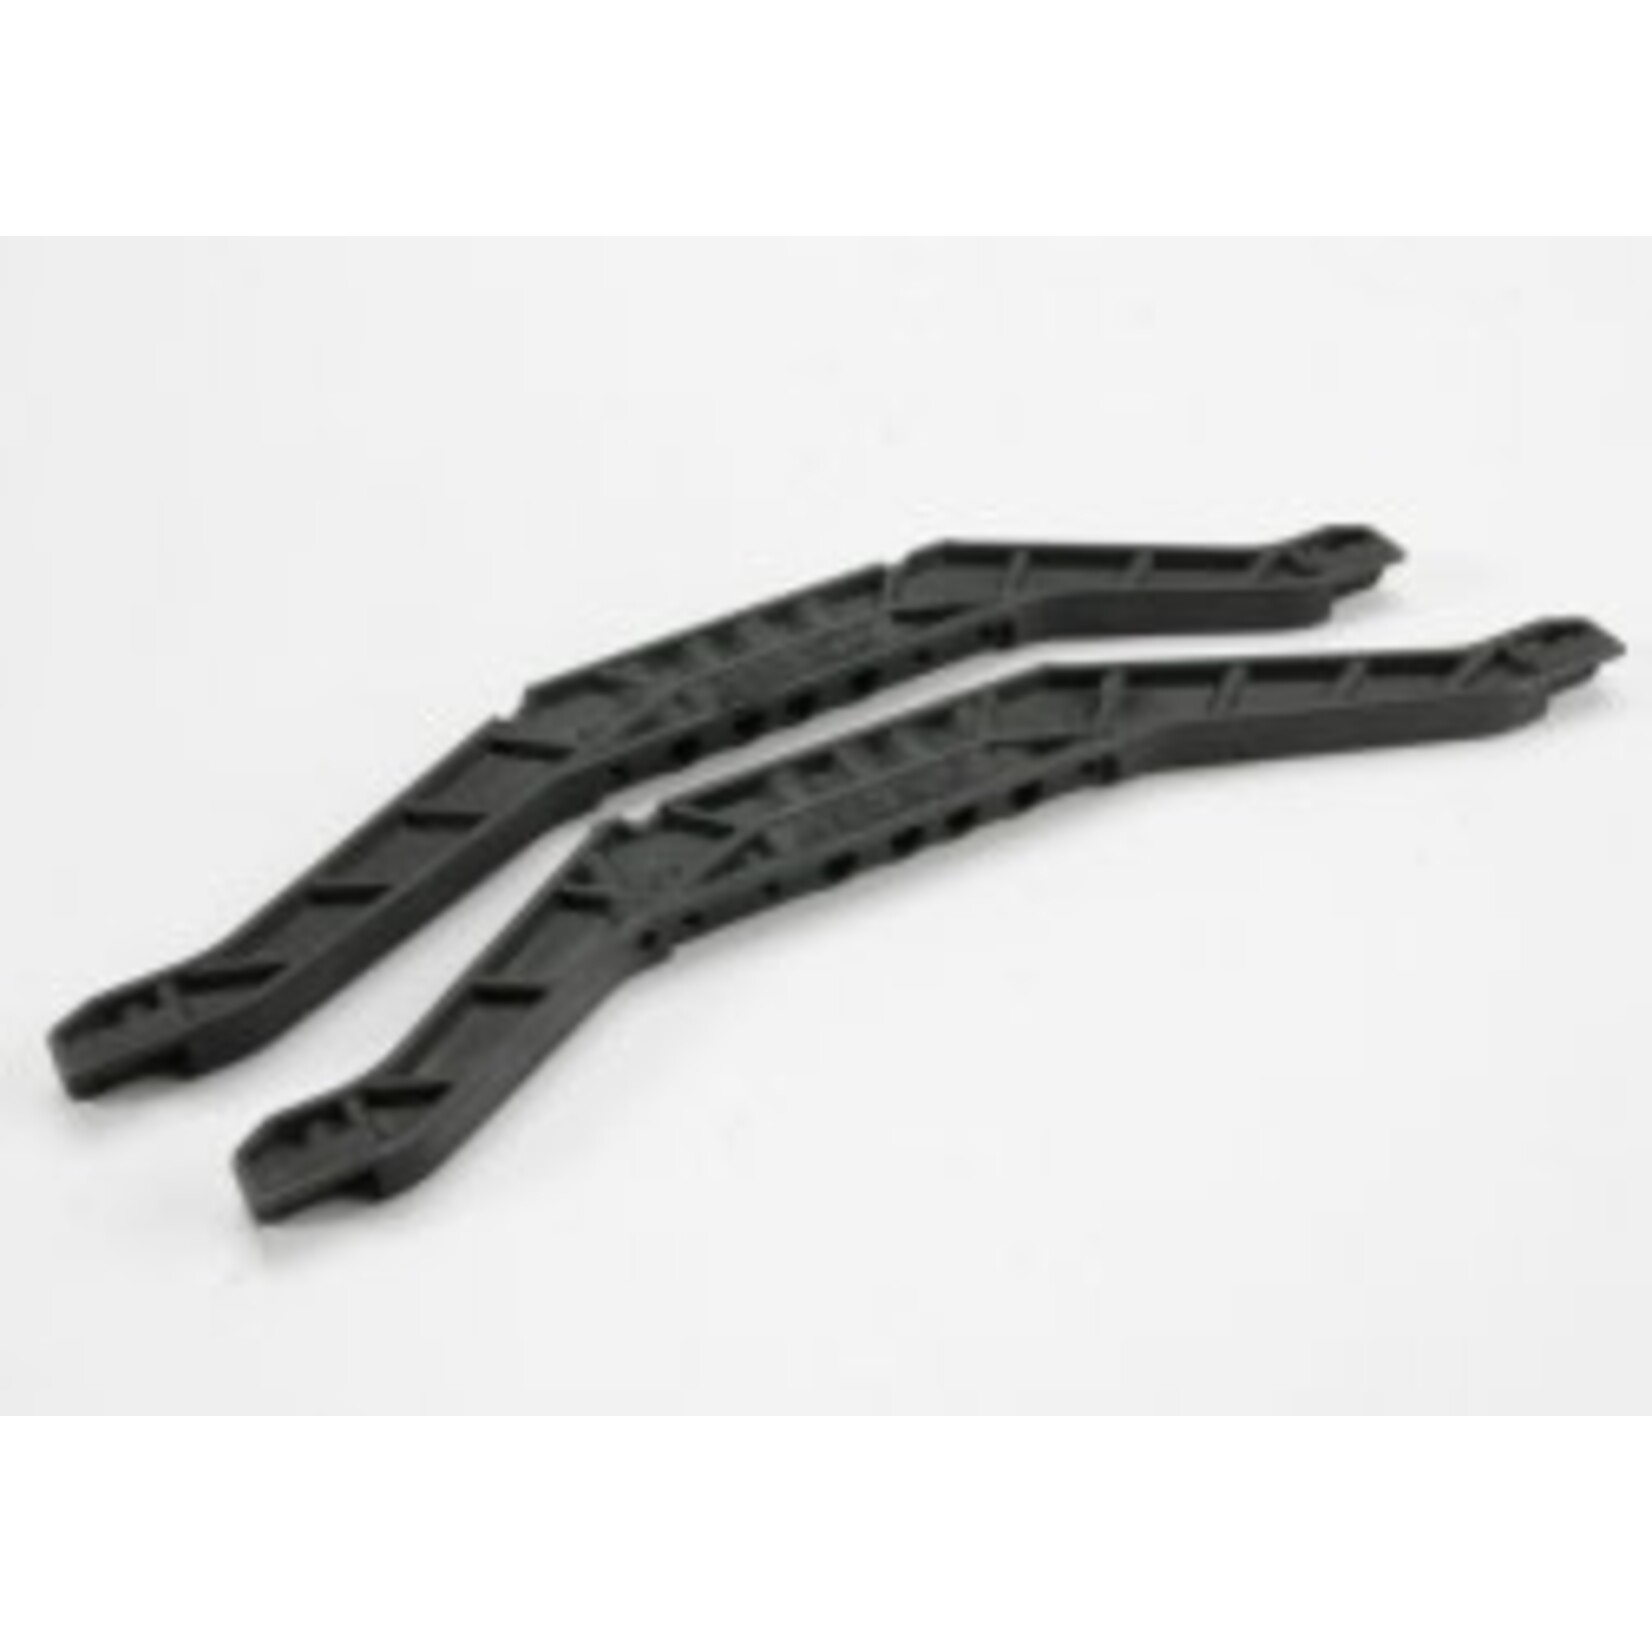 Traxxas Black lower chassis braces (2) for long-wheelbase T-Maxx®